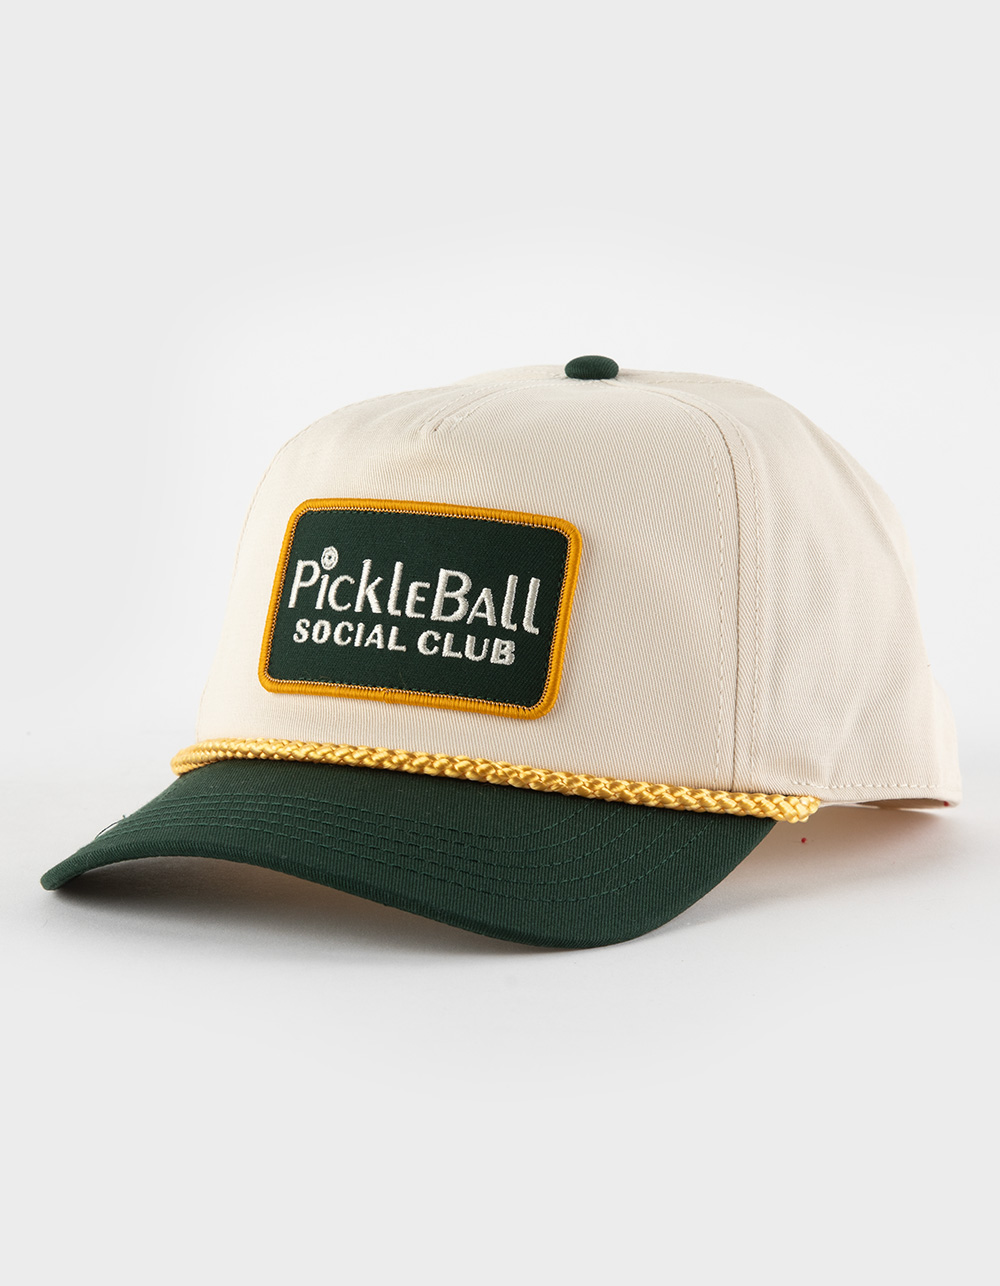 American Needle Pickle Ball Roscoe Snapback Hat - Multi-Colored - One Size